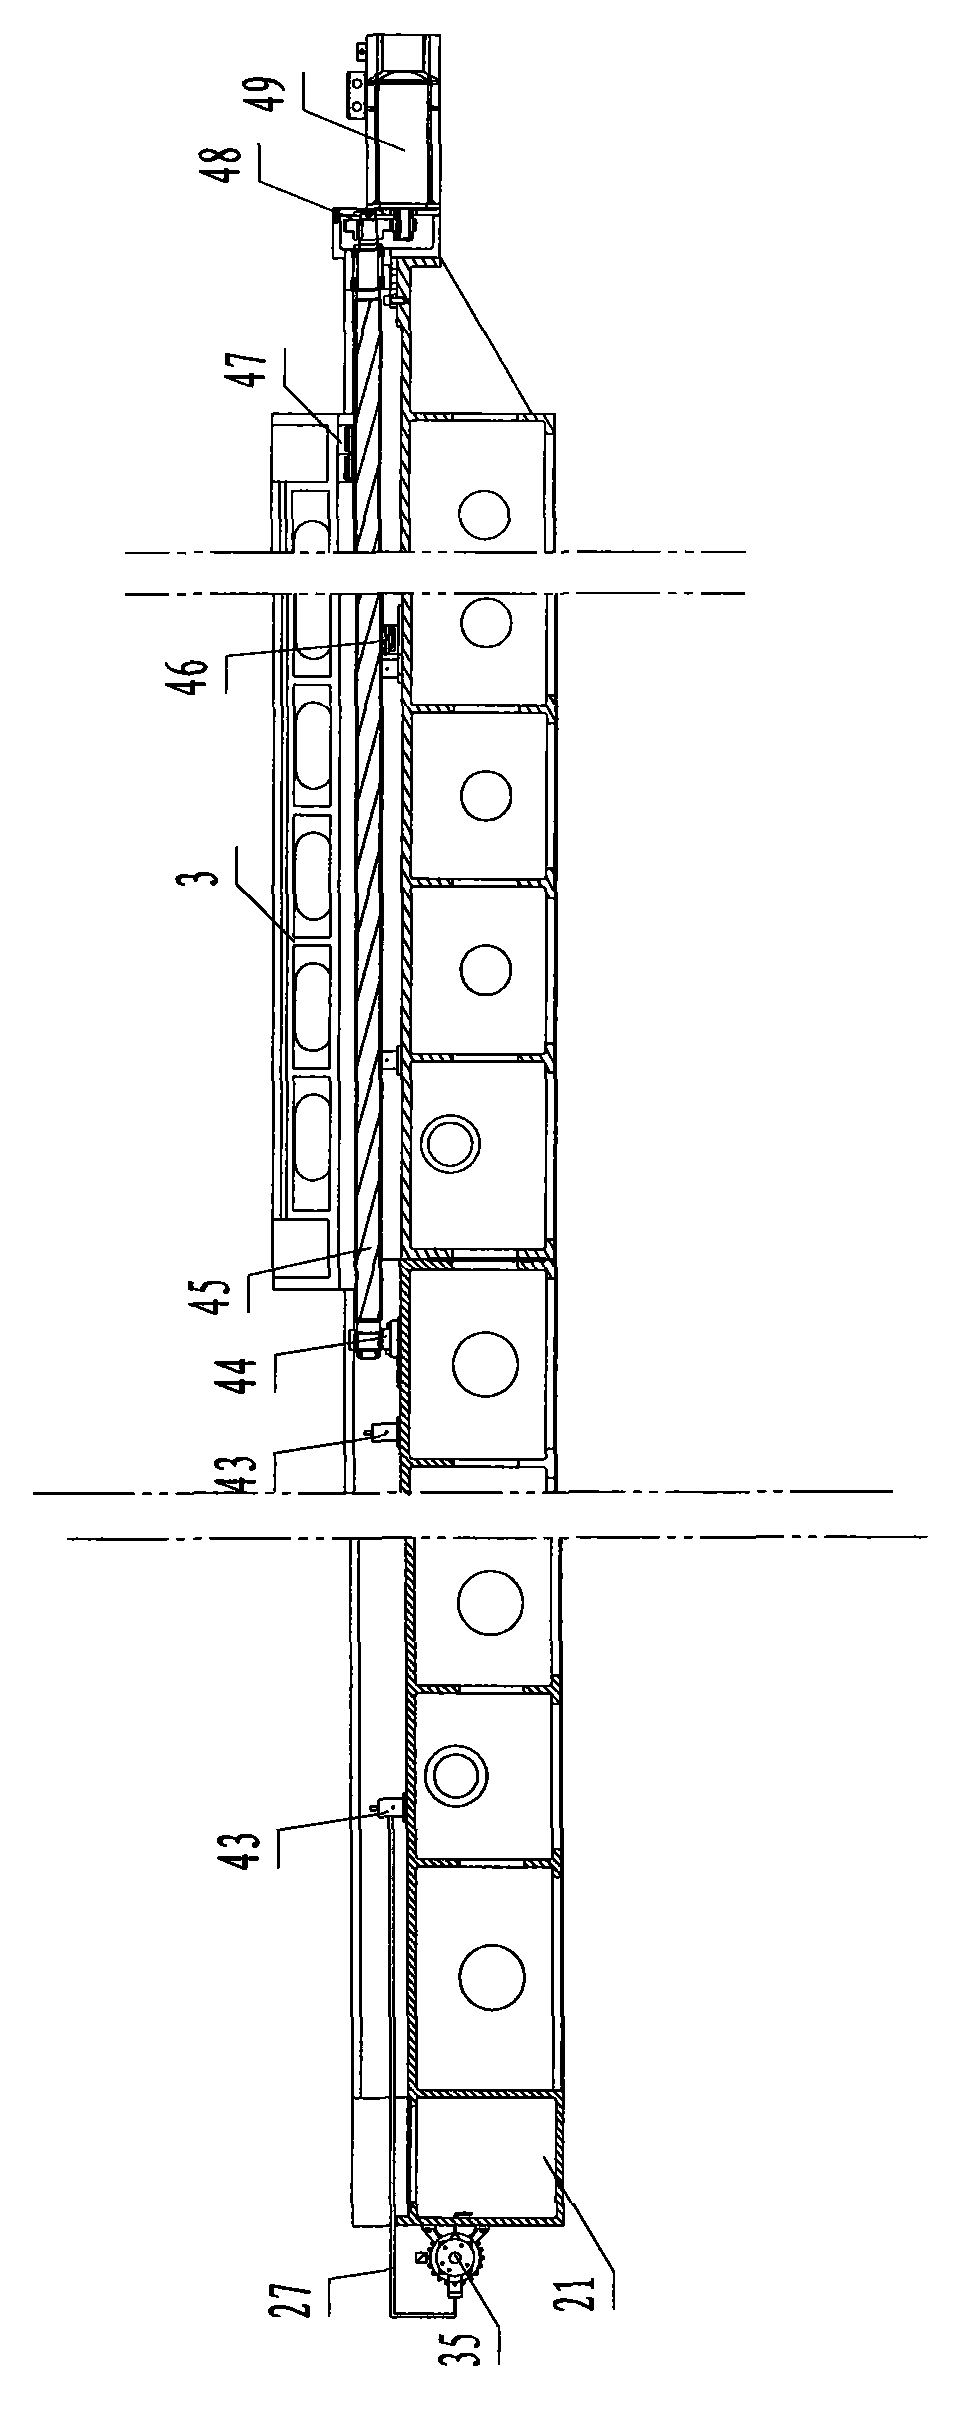 Gantry numerical-control milling and grinding integrated lathe of fixed column and movable beam type